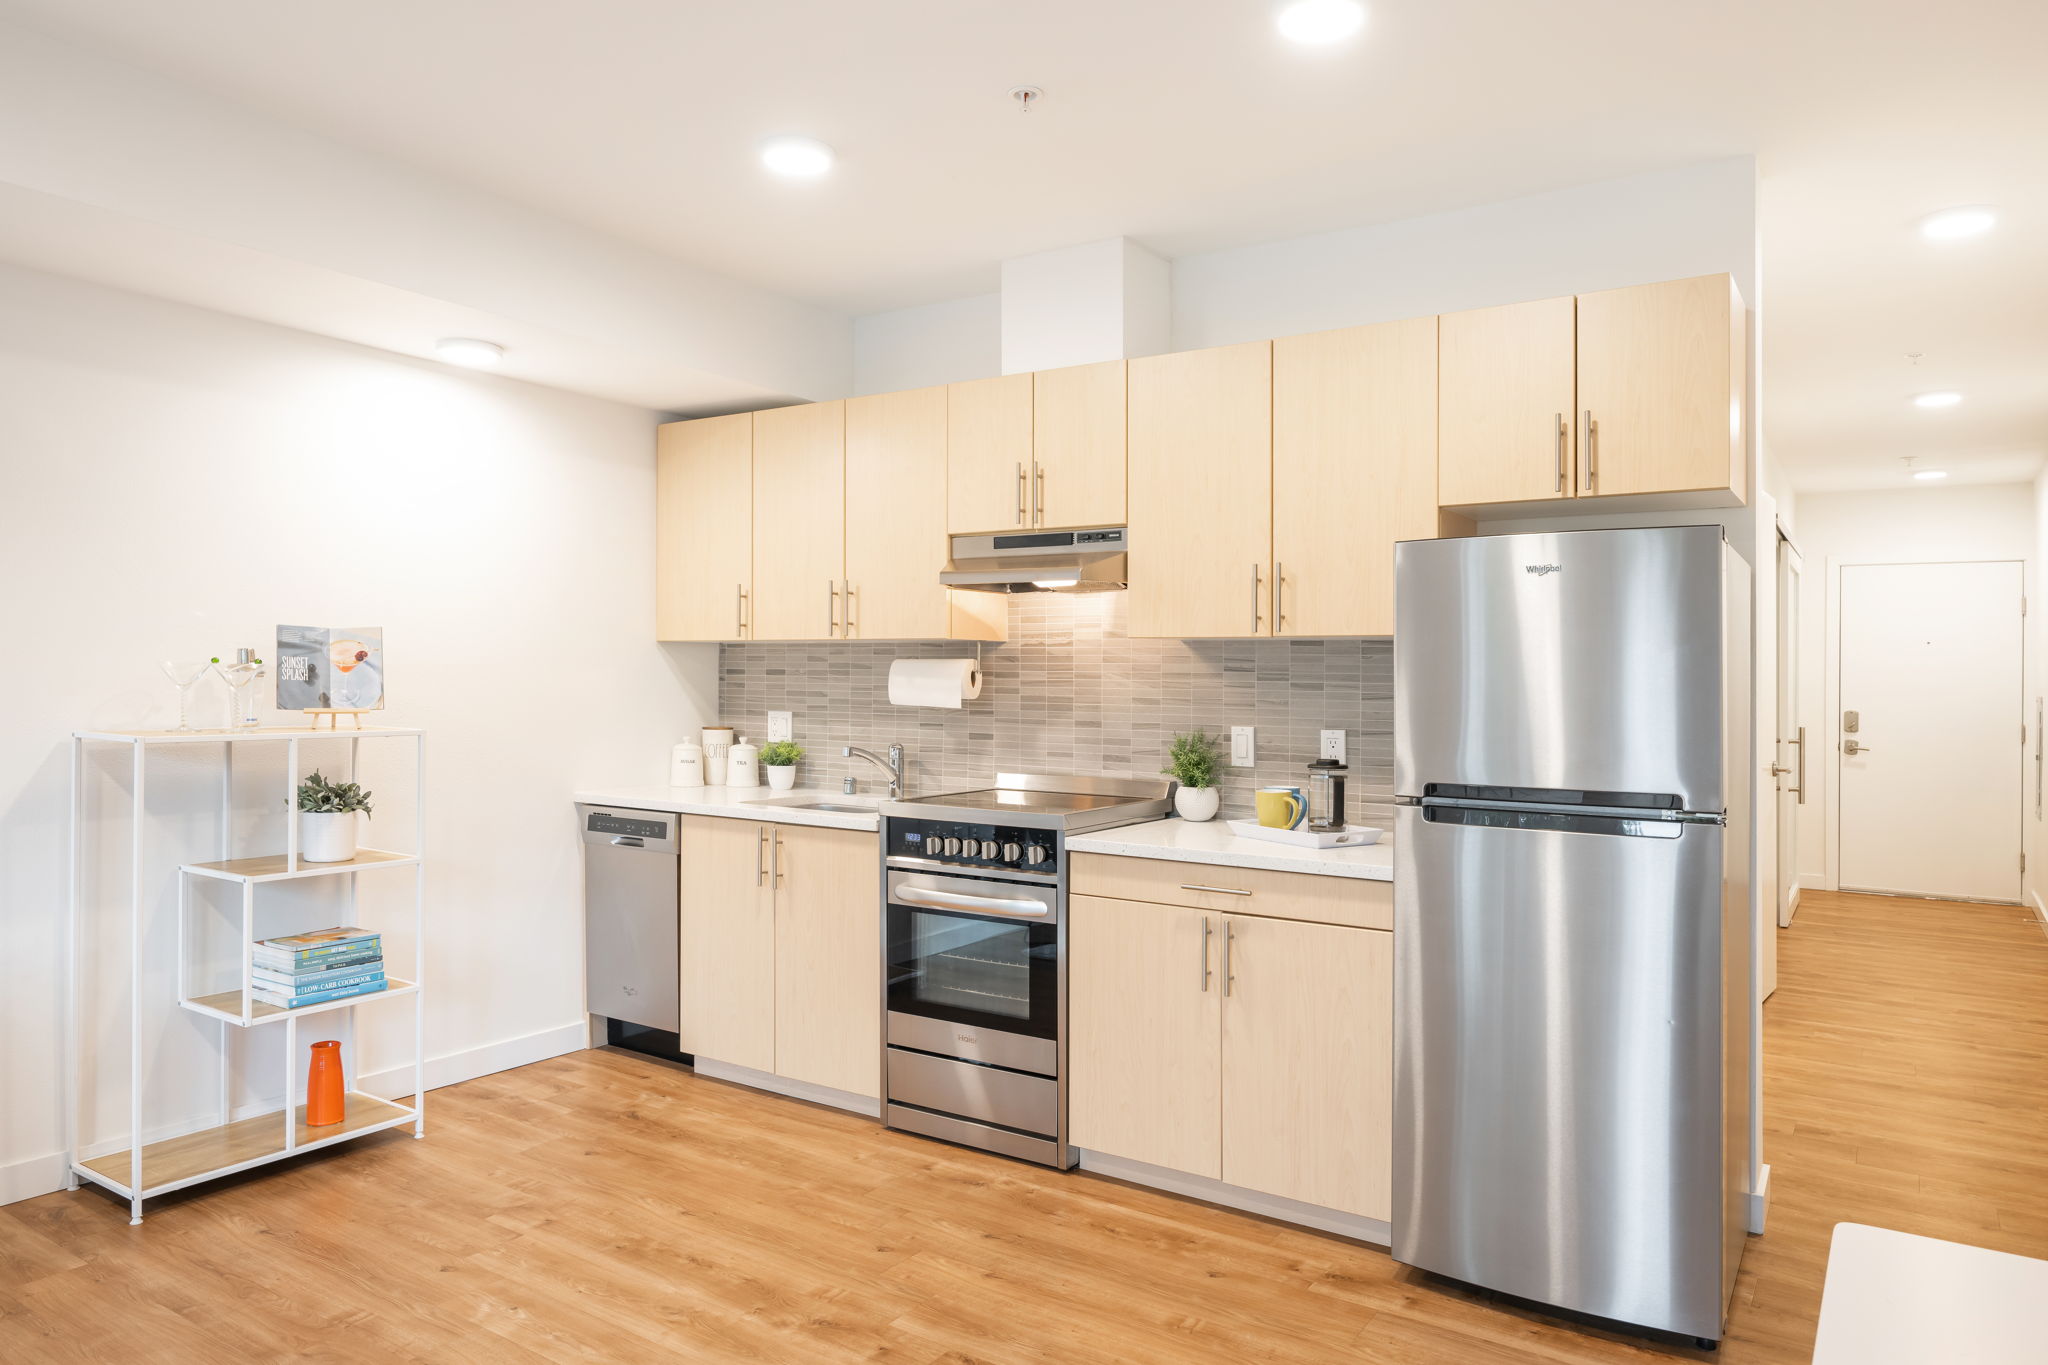 Well-appointed full-size kitchen with quartz countertops, sleek cabinetry, stainless appliances. Microwave is included (not shown in the photos)